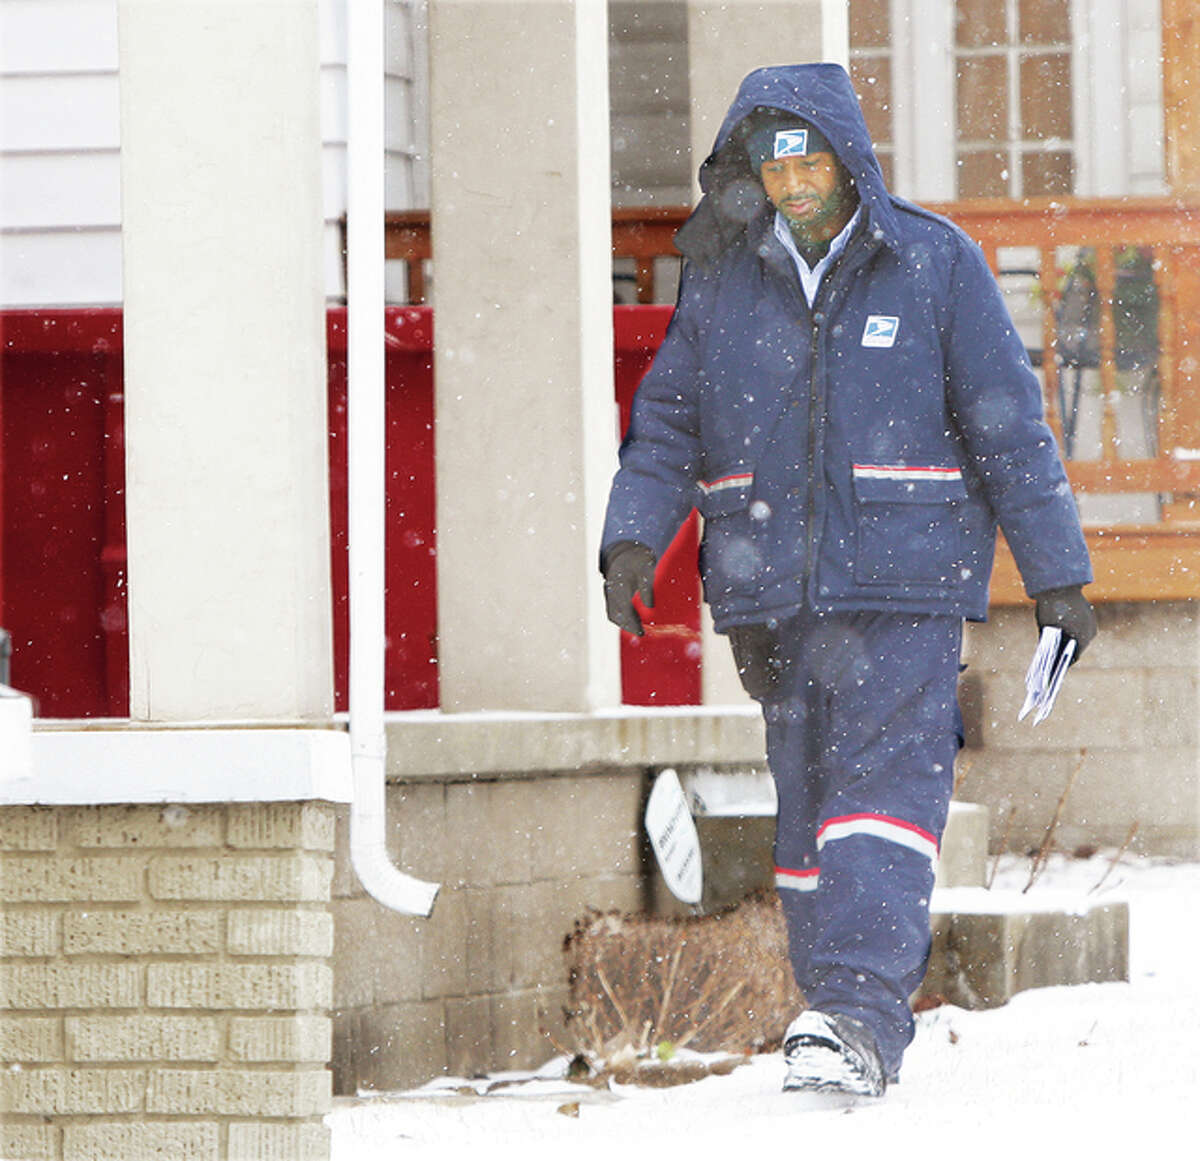 A conscientious Alton letter carrier makes his rounds in the snow, door-to-door, Tuesday on West 9th Street in Alton. Unfortunately, a substitue letter carrier in Alton recently did not share the same work ethic, dumping at least 200 pieces of mail in a ditch at Alby and Blair streets and in a dumpster elsewhere. The mail was scheduled to be delivered to a particular neighborhood on Jan. 23.